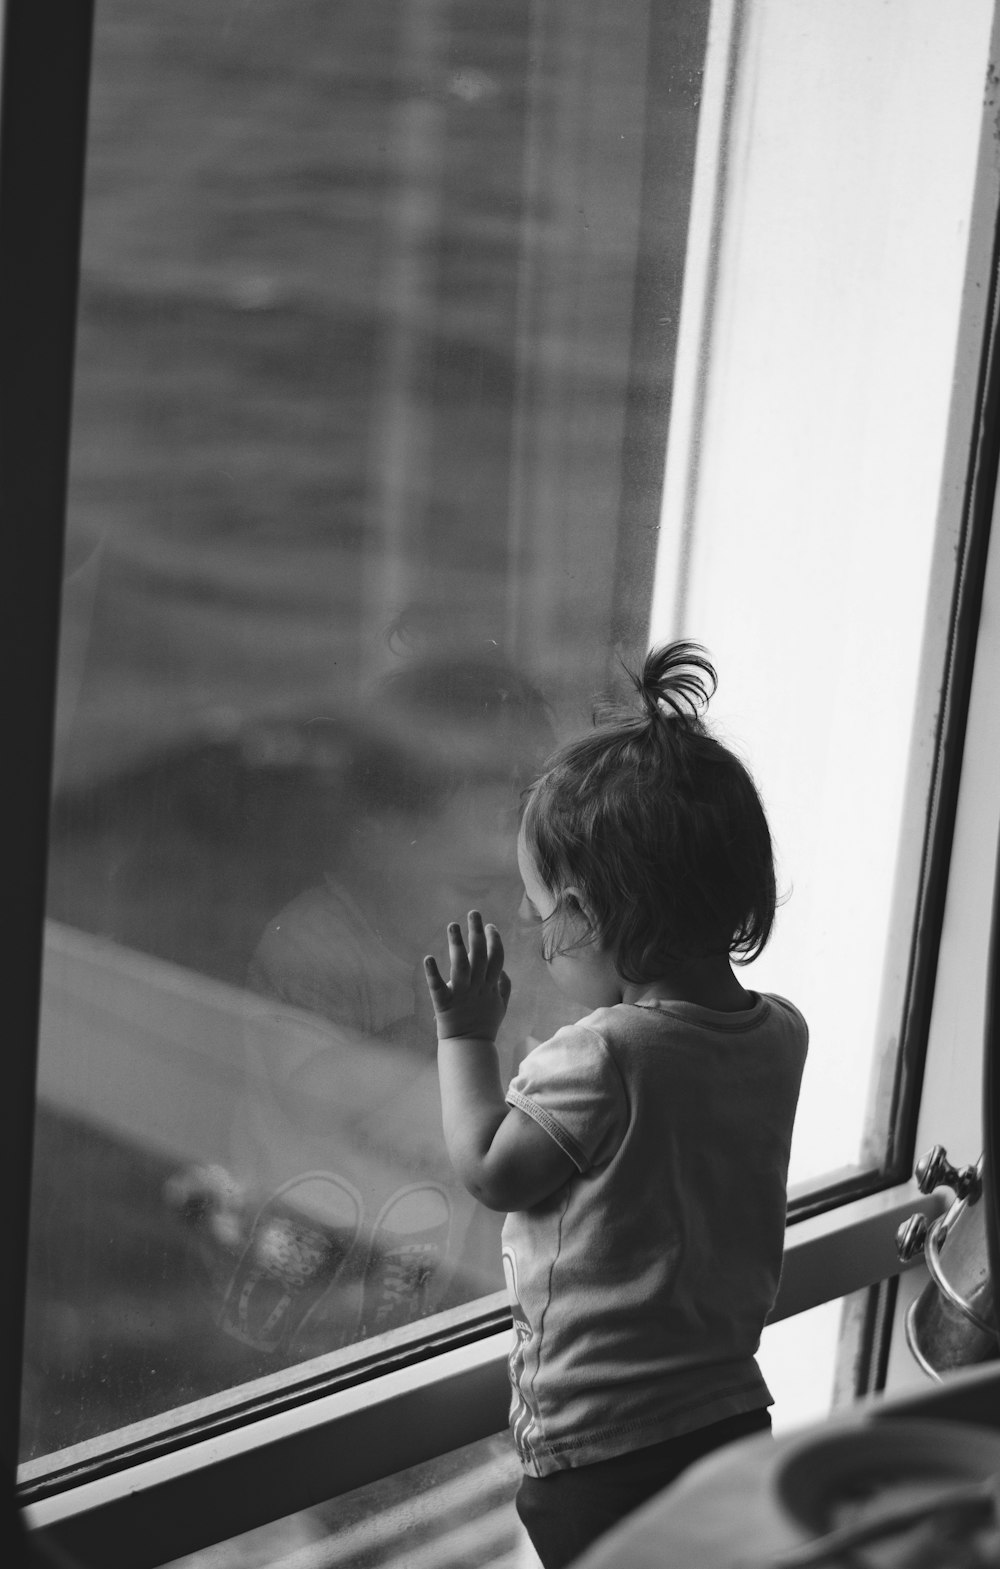 baby leaning on glass window while looking down in greyscale photography